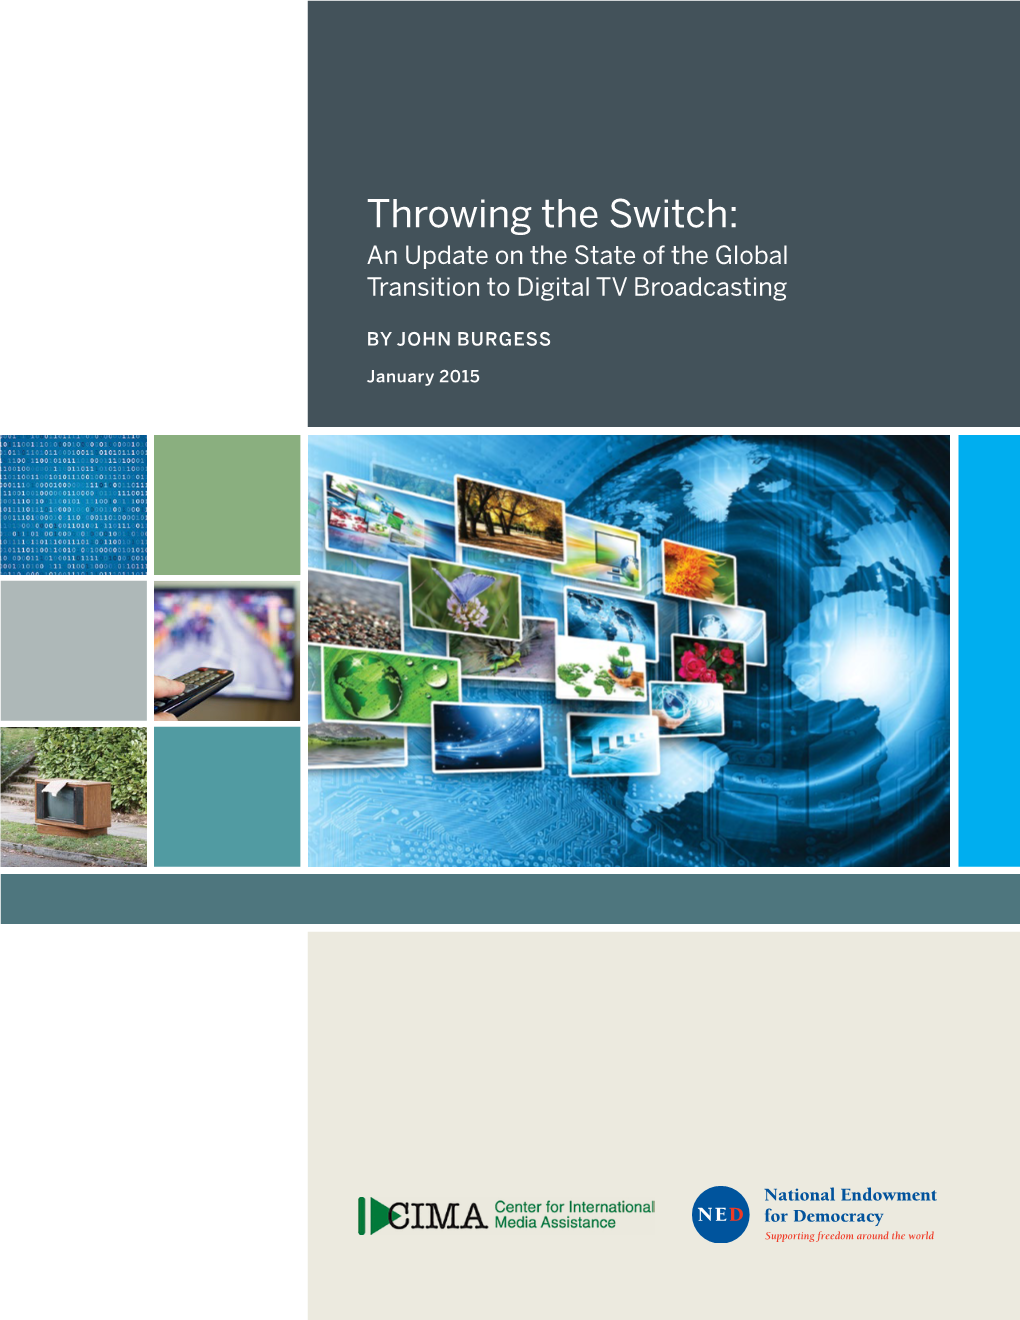 Throwing the Switch: an Update on the State of the Global Transition to Digital TV Broadcasting